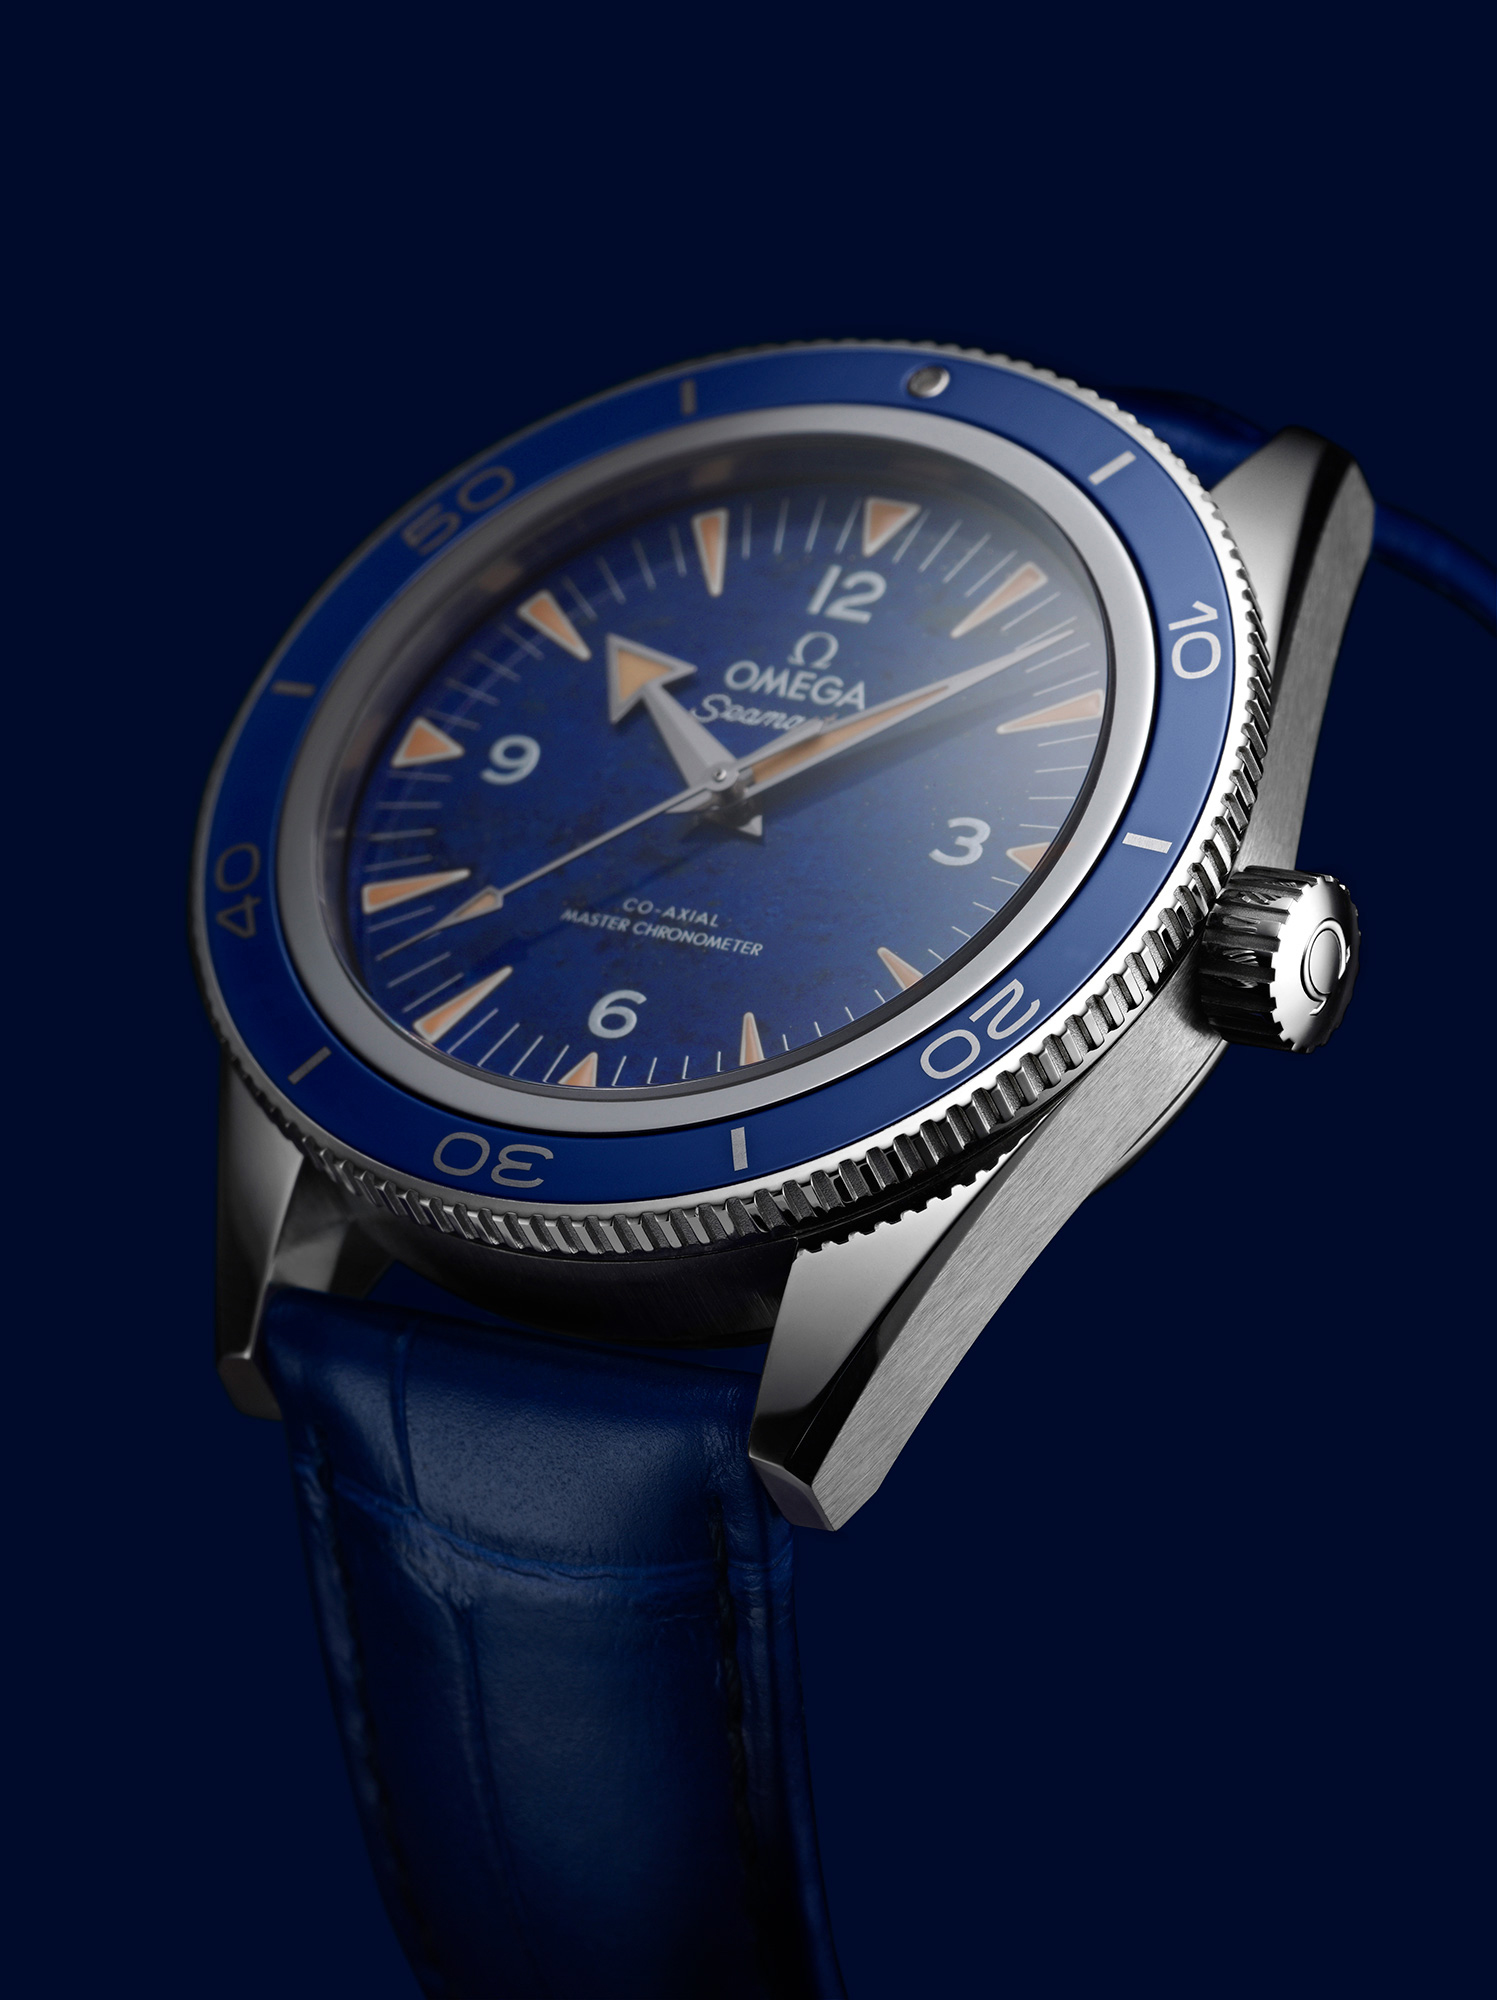 Jewels of the Sea: Omega Unveils Seamaster 300 Models with Mineral Dials |  WatchTime - USA's  Watch Magazine